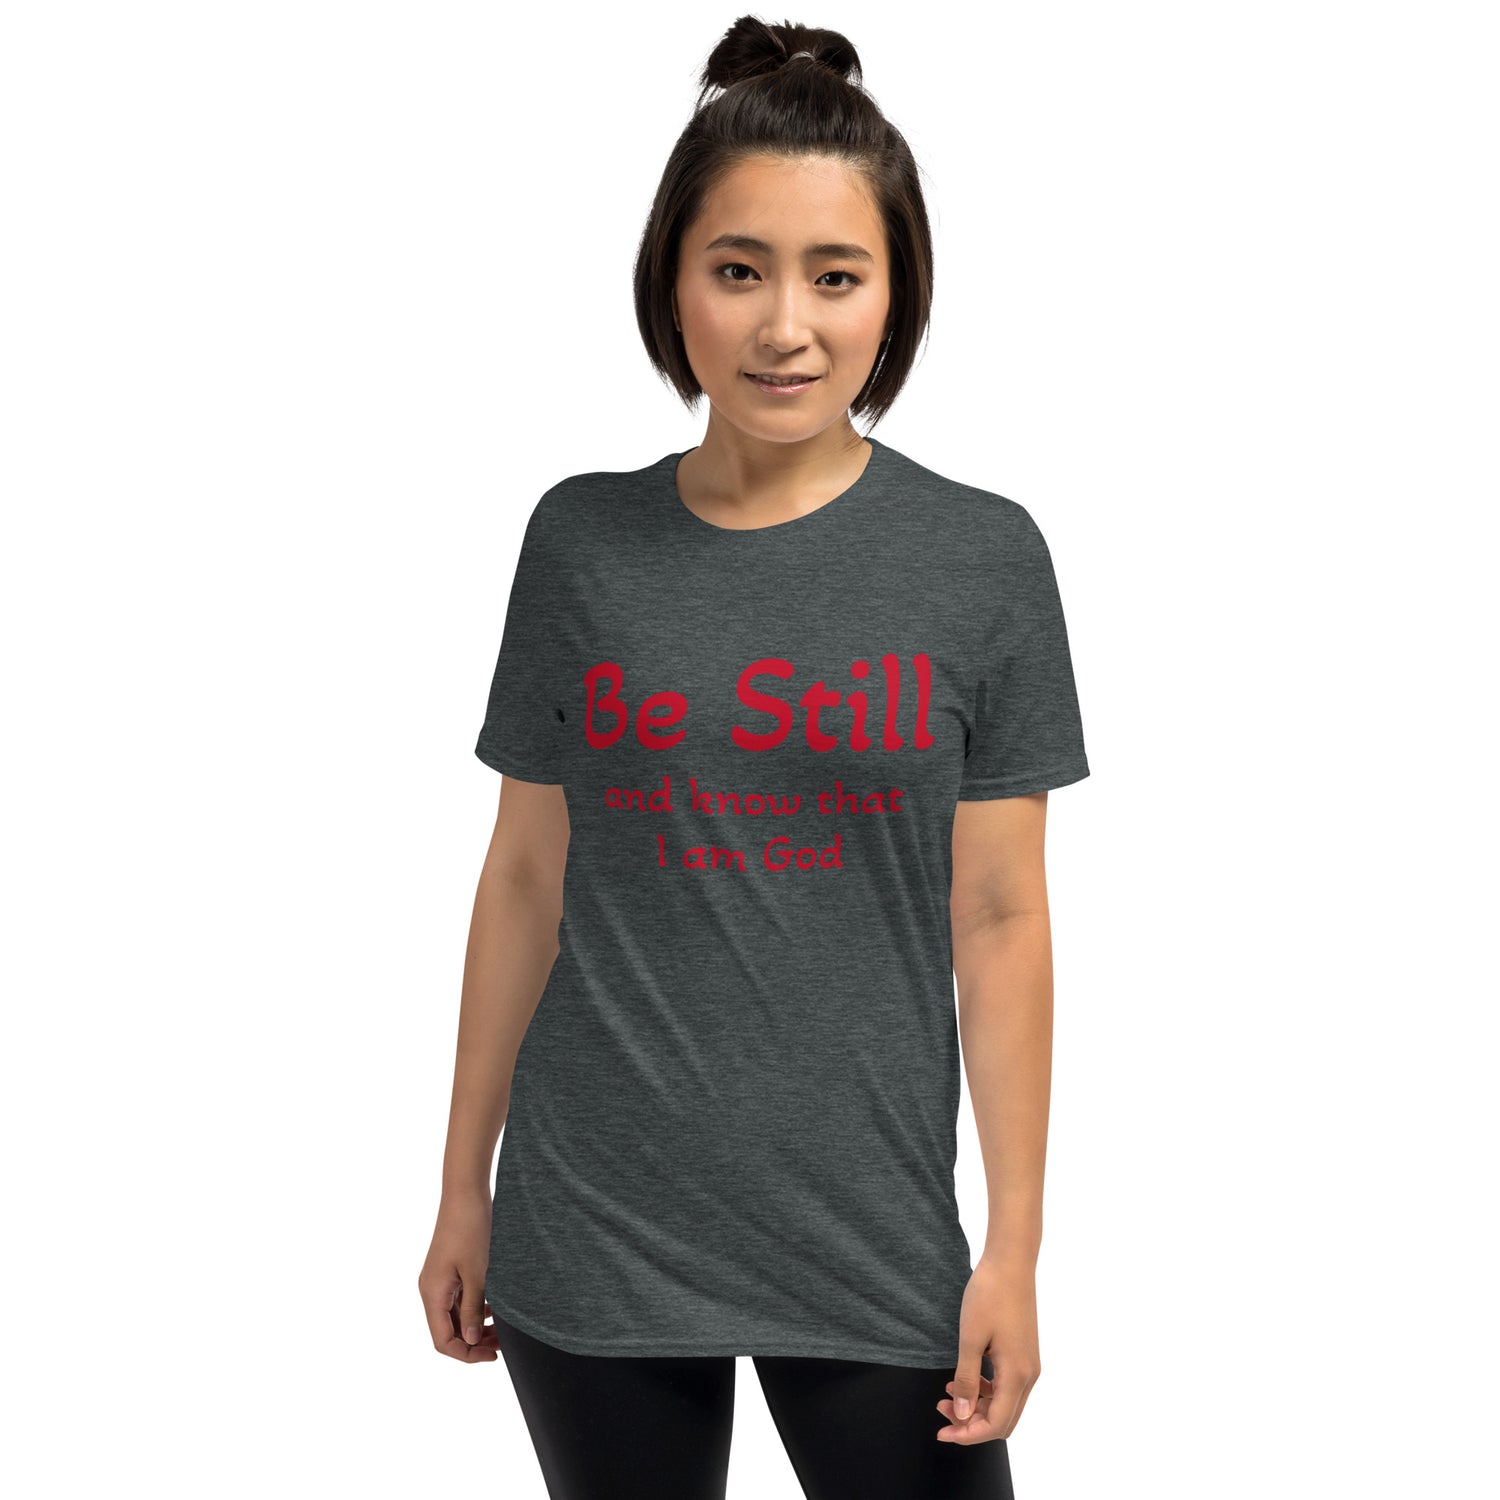 Unisex soft-style dark heather  T-shirt with Be Still and Know that I am God in Red letters